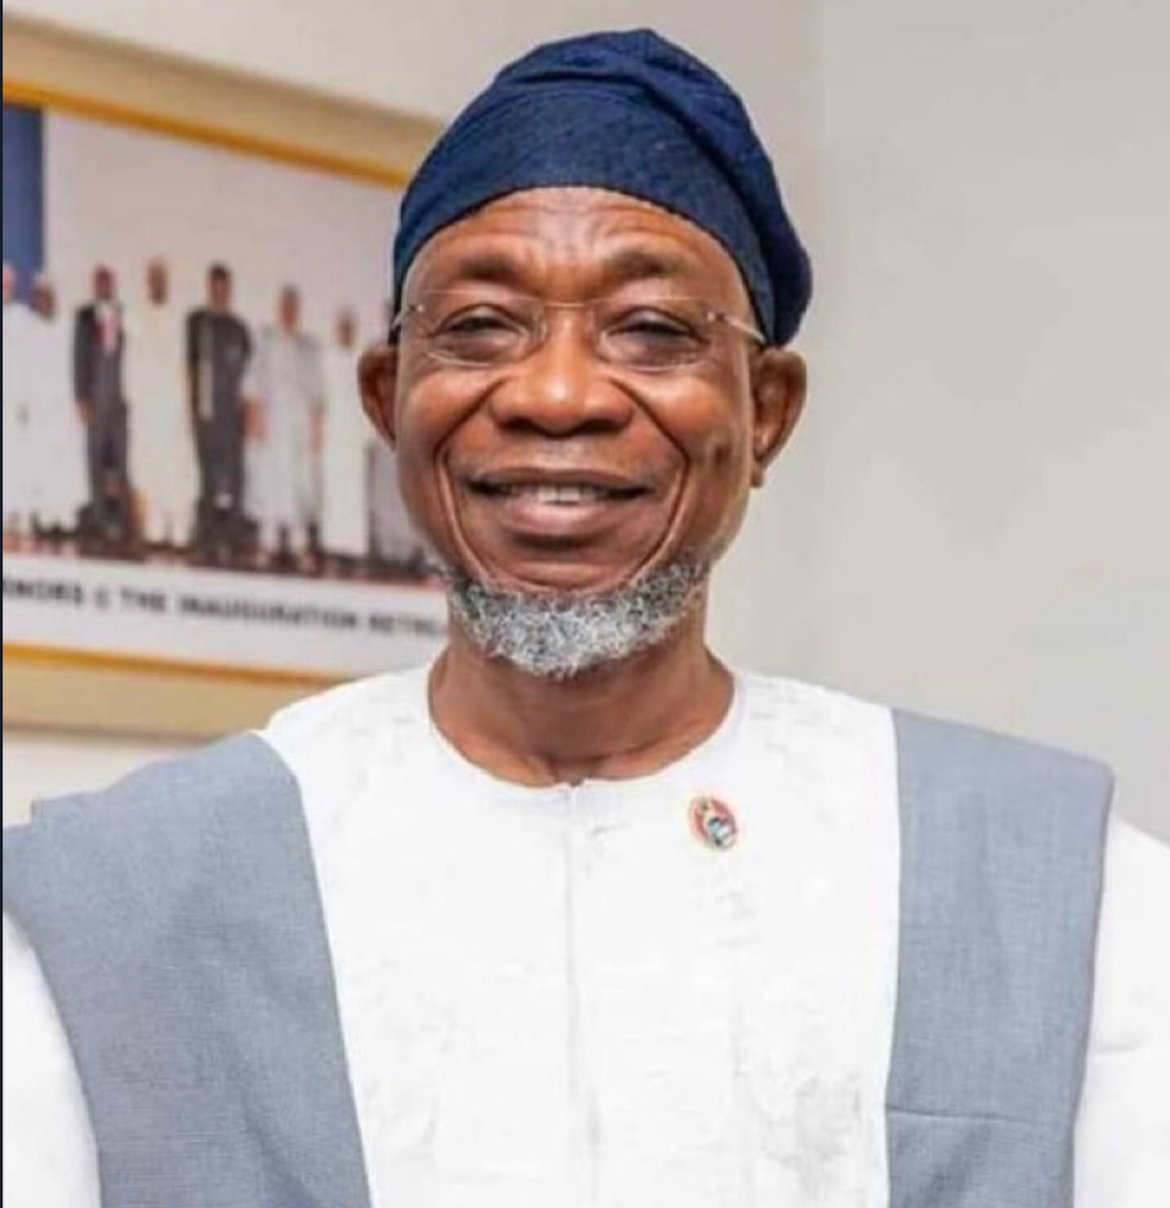 Osun APC Expels Rauf Aregbesola, Warns Members Against Associating With Ex-Governor’s Group | MarvelTvUpdates